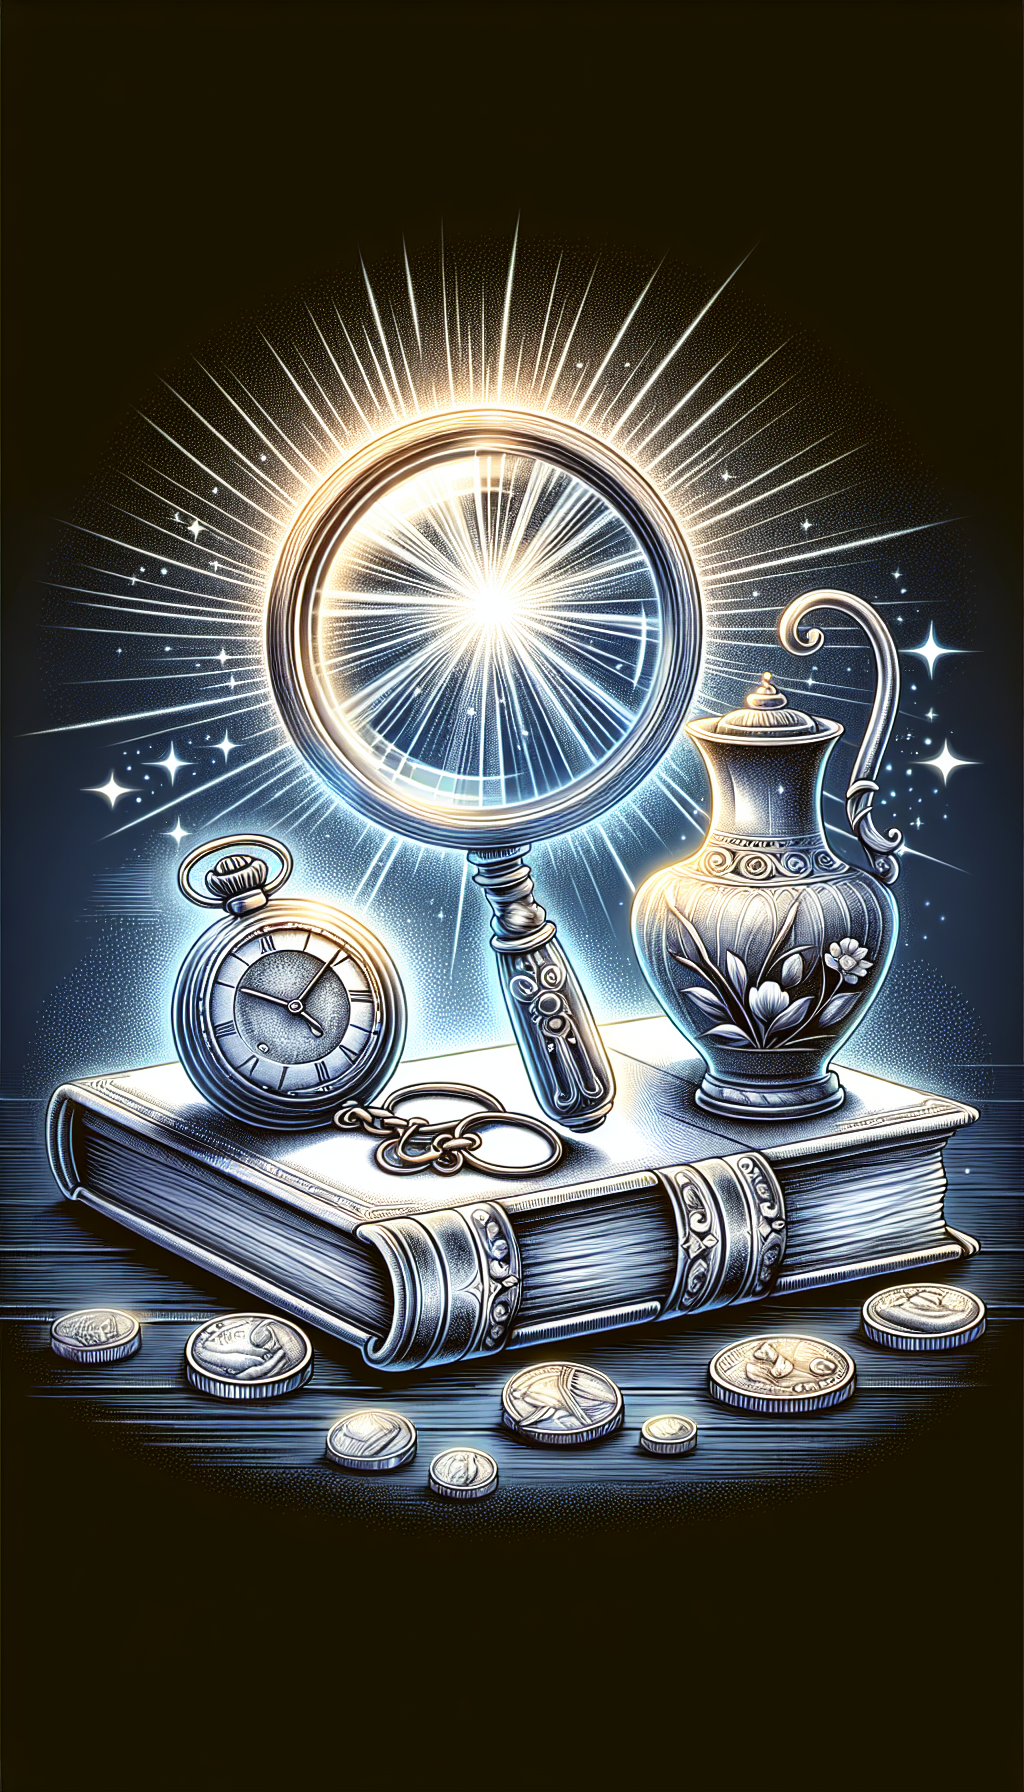 An elegant, whimsical line drawing shows a shimmering magnifying glass hovering above a pocket watch, intricate vase, and weathered book, all resting on a pedestal. The objects are surrounded by a ghostly aura of shimmering coins and appraiser's tools, symbolizing the hidden value of antiques, with the magnifying glass bringing their past grandeur into sharp focus.